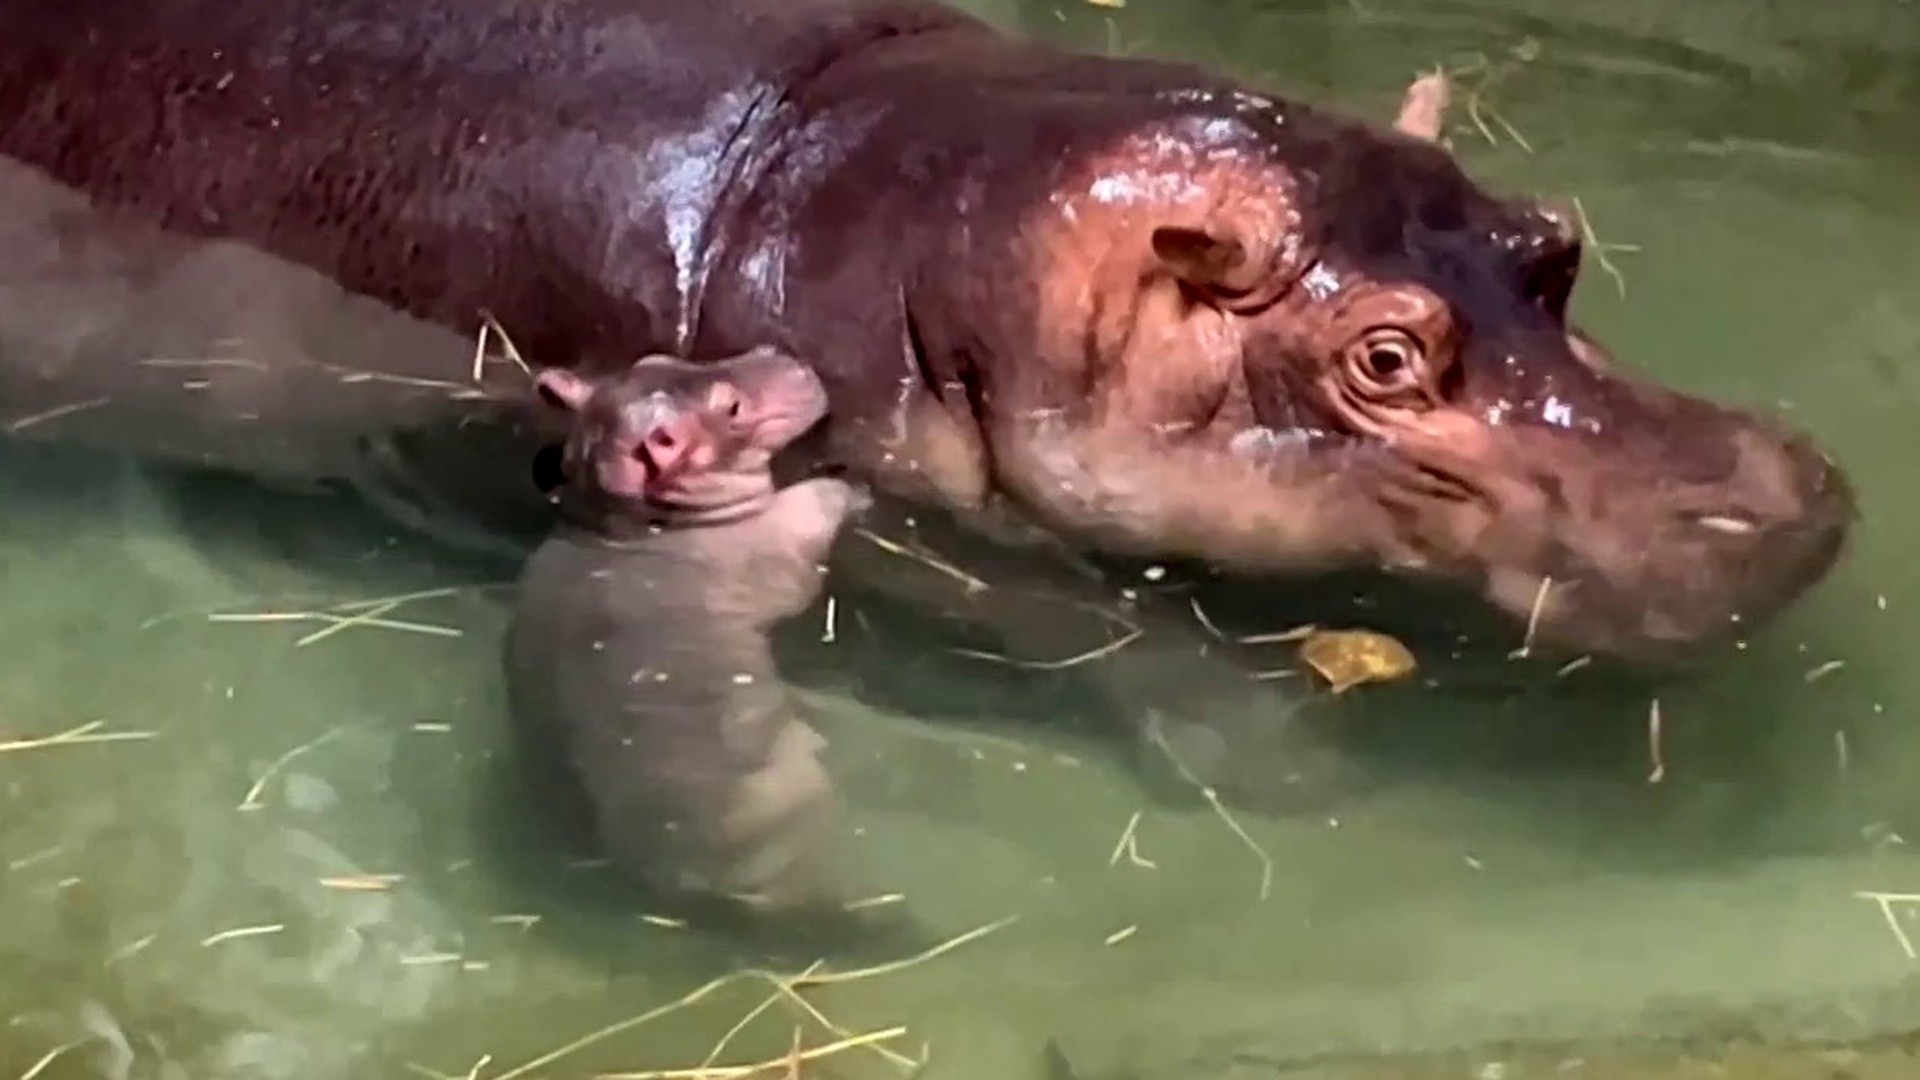 Get a first look at images of Cincinnati Zoo's new baby hippo